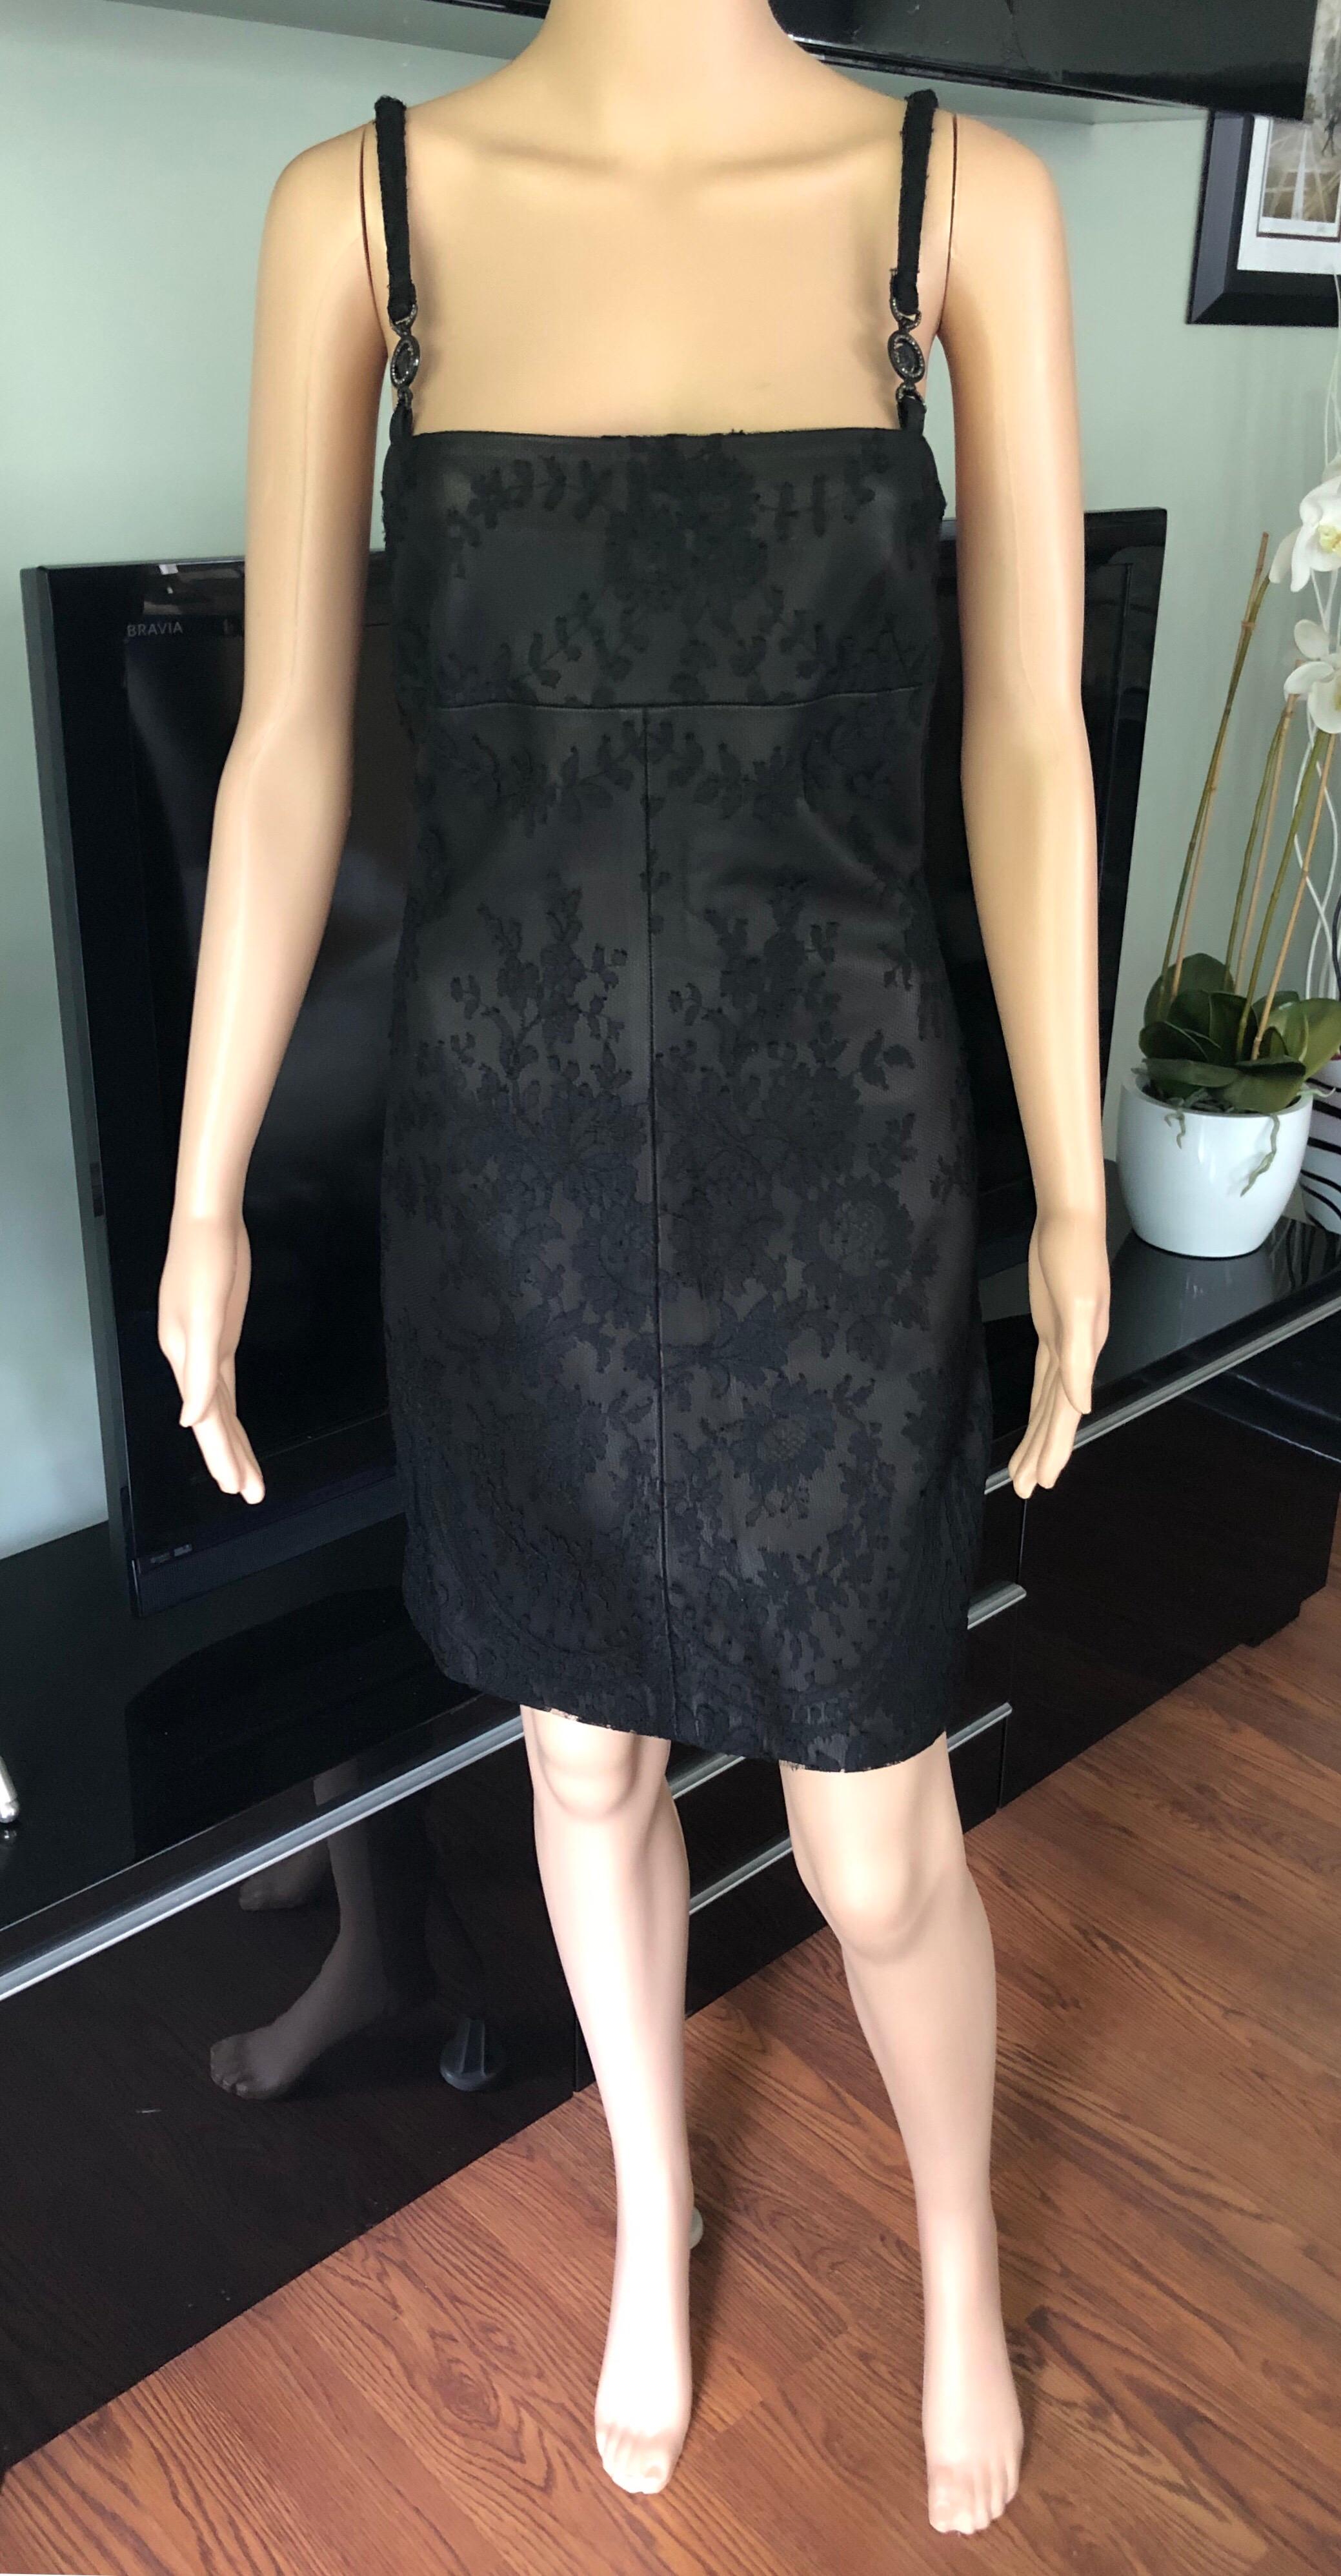 Gianni Versace F/W 1996 Vintage Lace and Leather Mini Dress IT 40

Black Gianni Versace leather mini dress with lace overlaying the leather featuring embellished medusa straps, square neck and concealed zip closure at back.